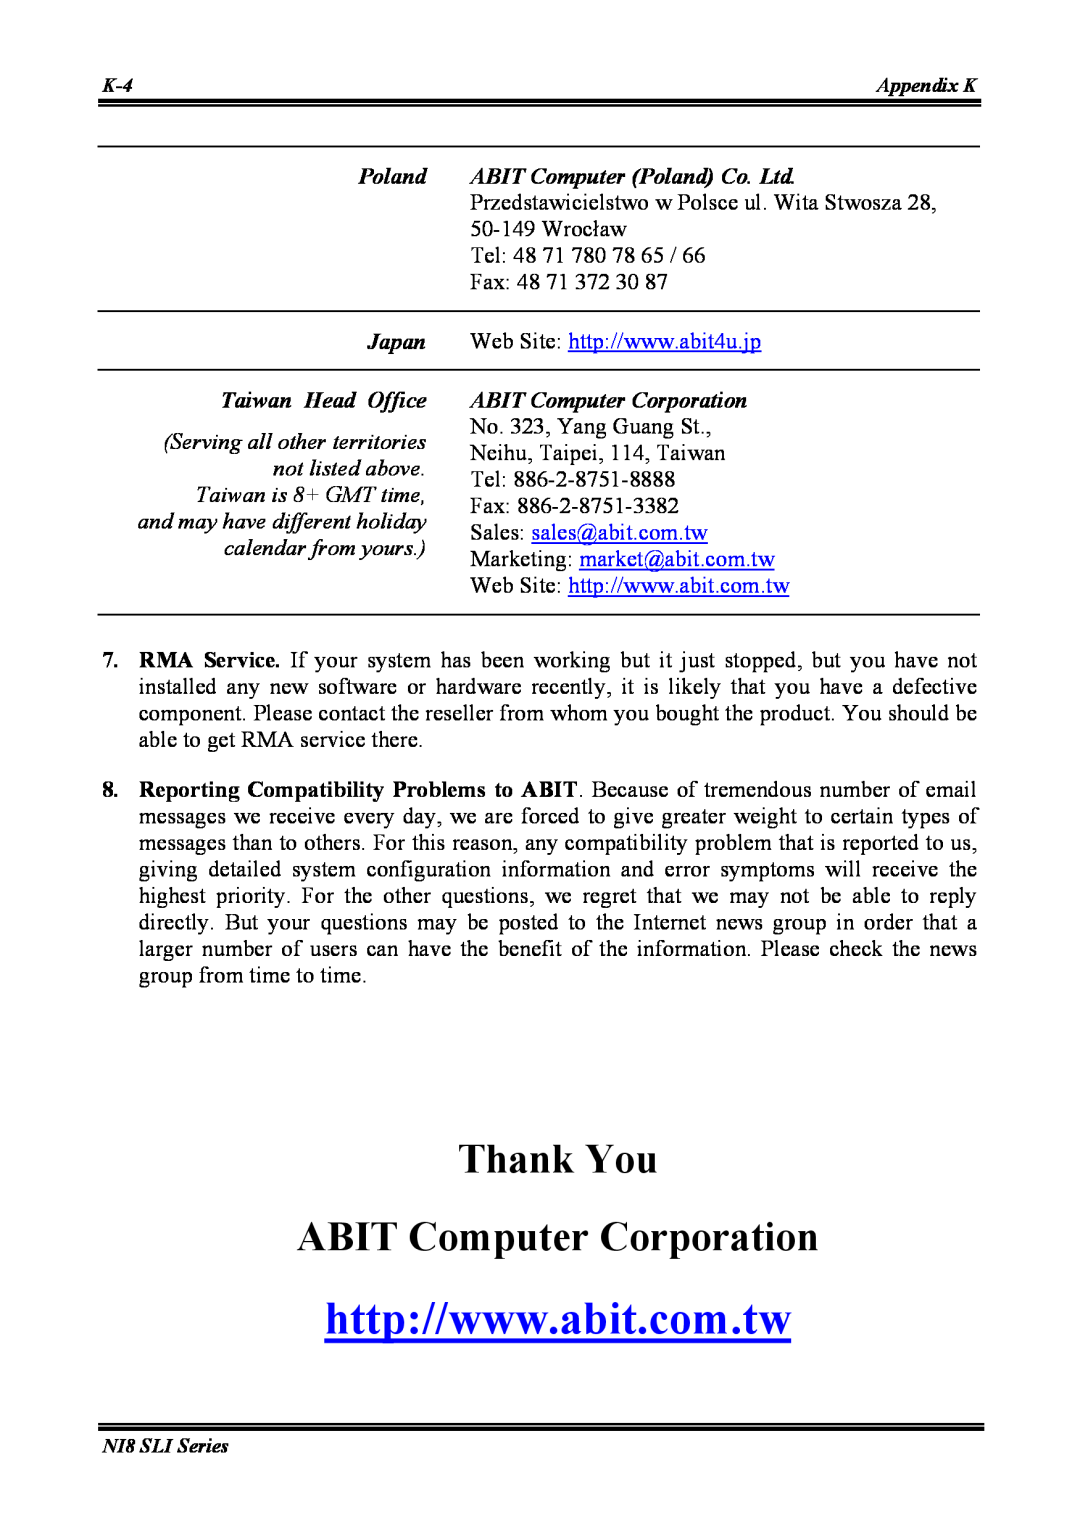 Abit NI8 SLI Thank You ABIT Computer Corporation, Serving all other territories, No. 323, Yang Guang St, not listed above 